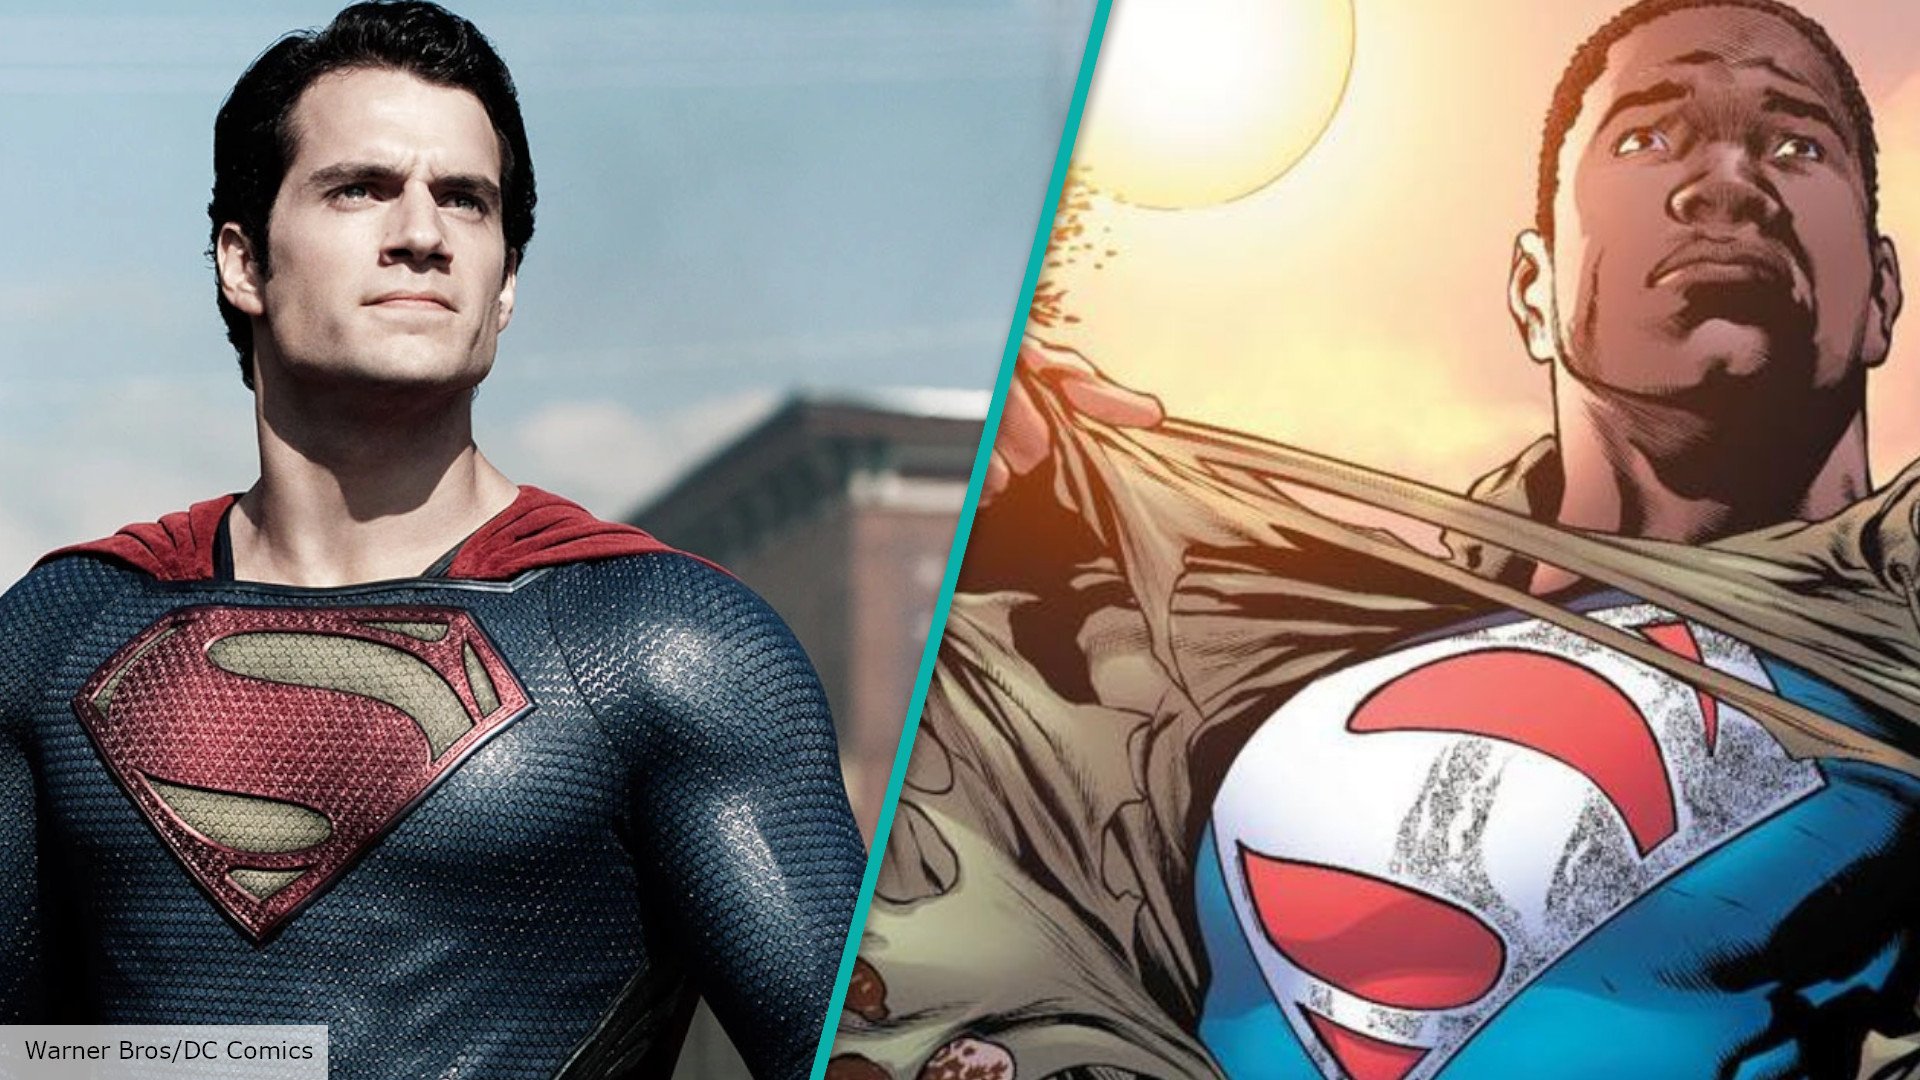 Progress is being made” on new Superman movie | The Digital Fix